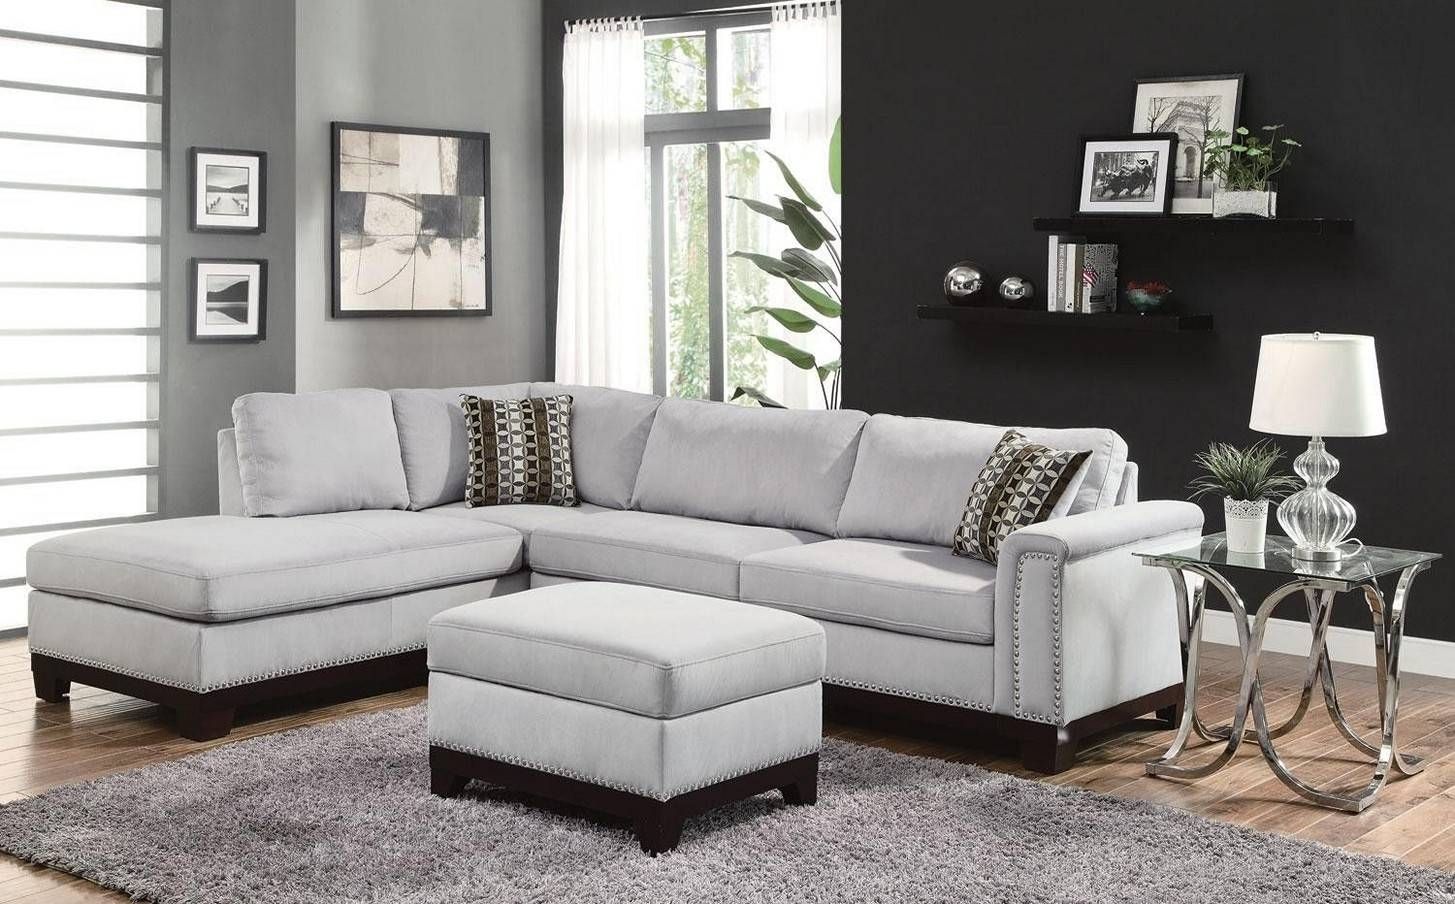 Light Grey Couch What Color Walls – Pinotharvest Intended For Sofas With Lights (View 15 of 30)